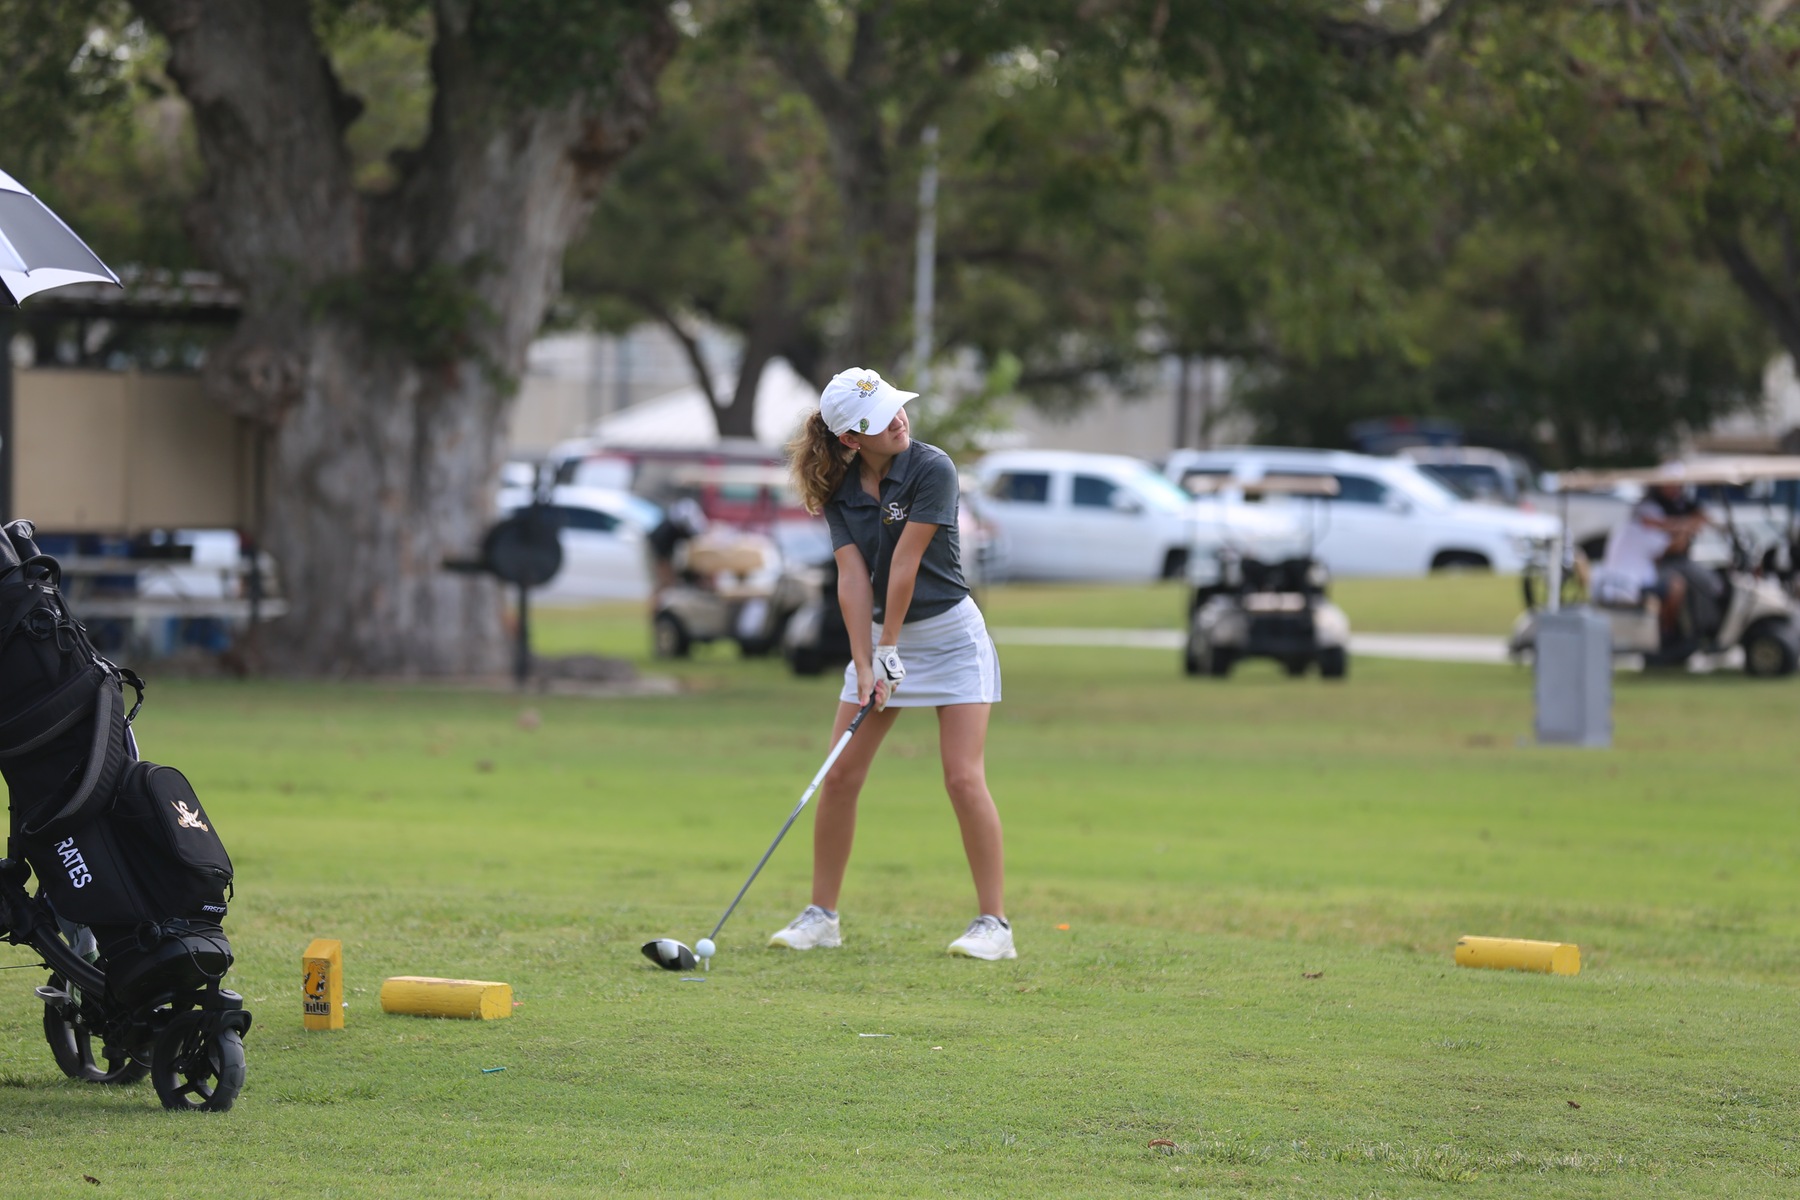 Women's Golf Finishes Day 1 of the Lady Bulldog Classic in First Place